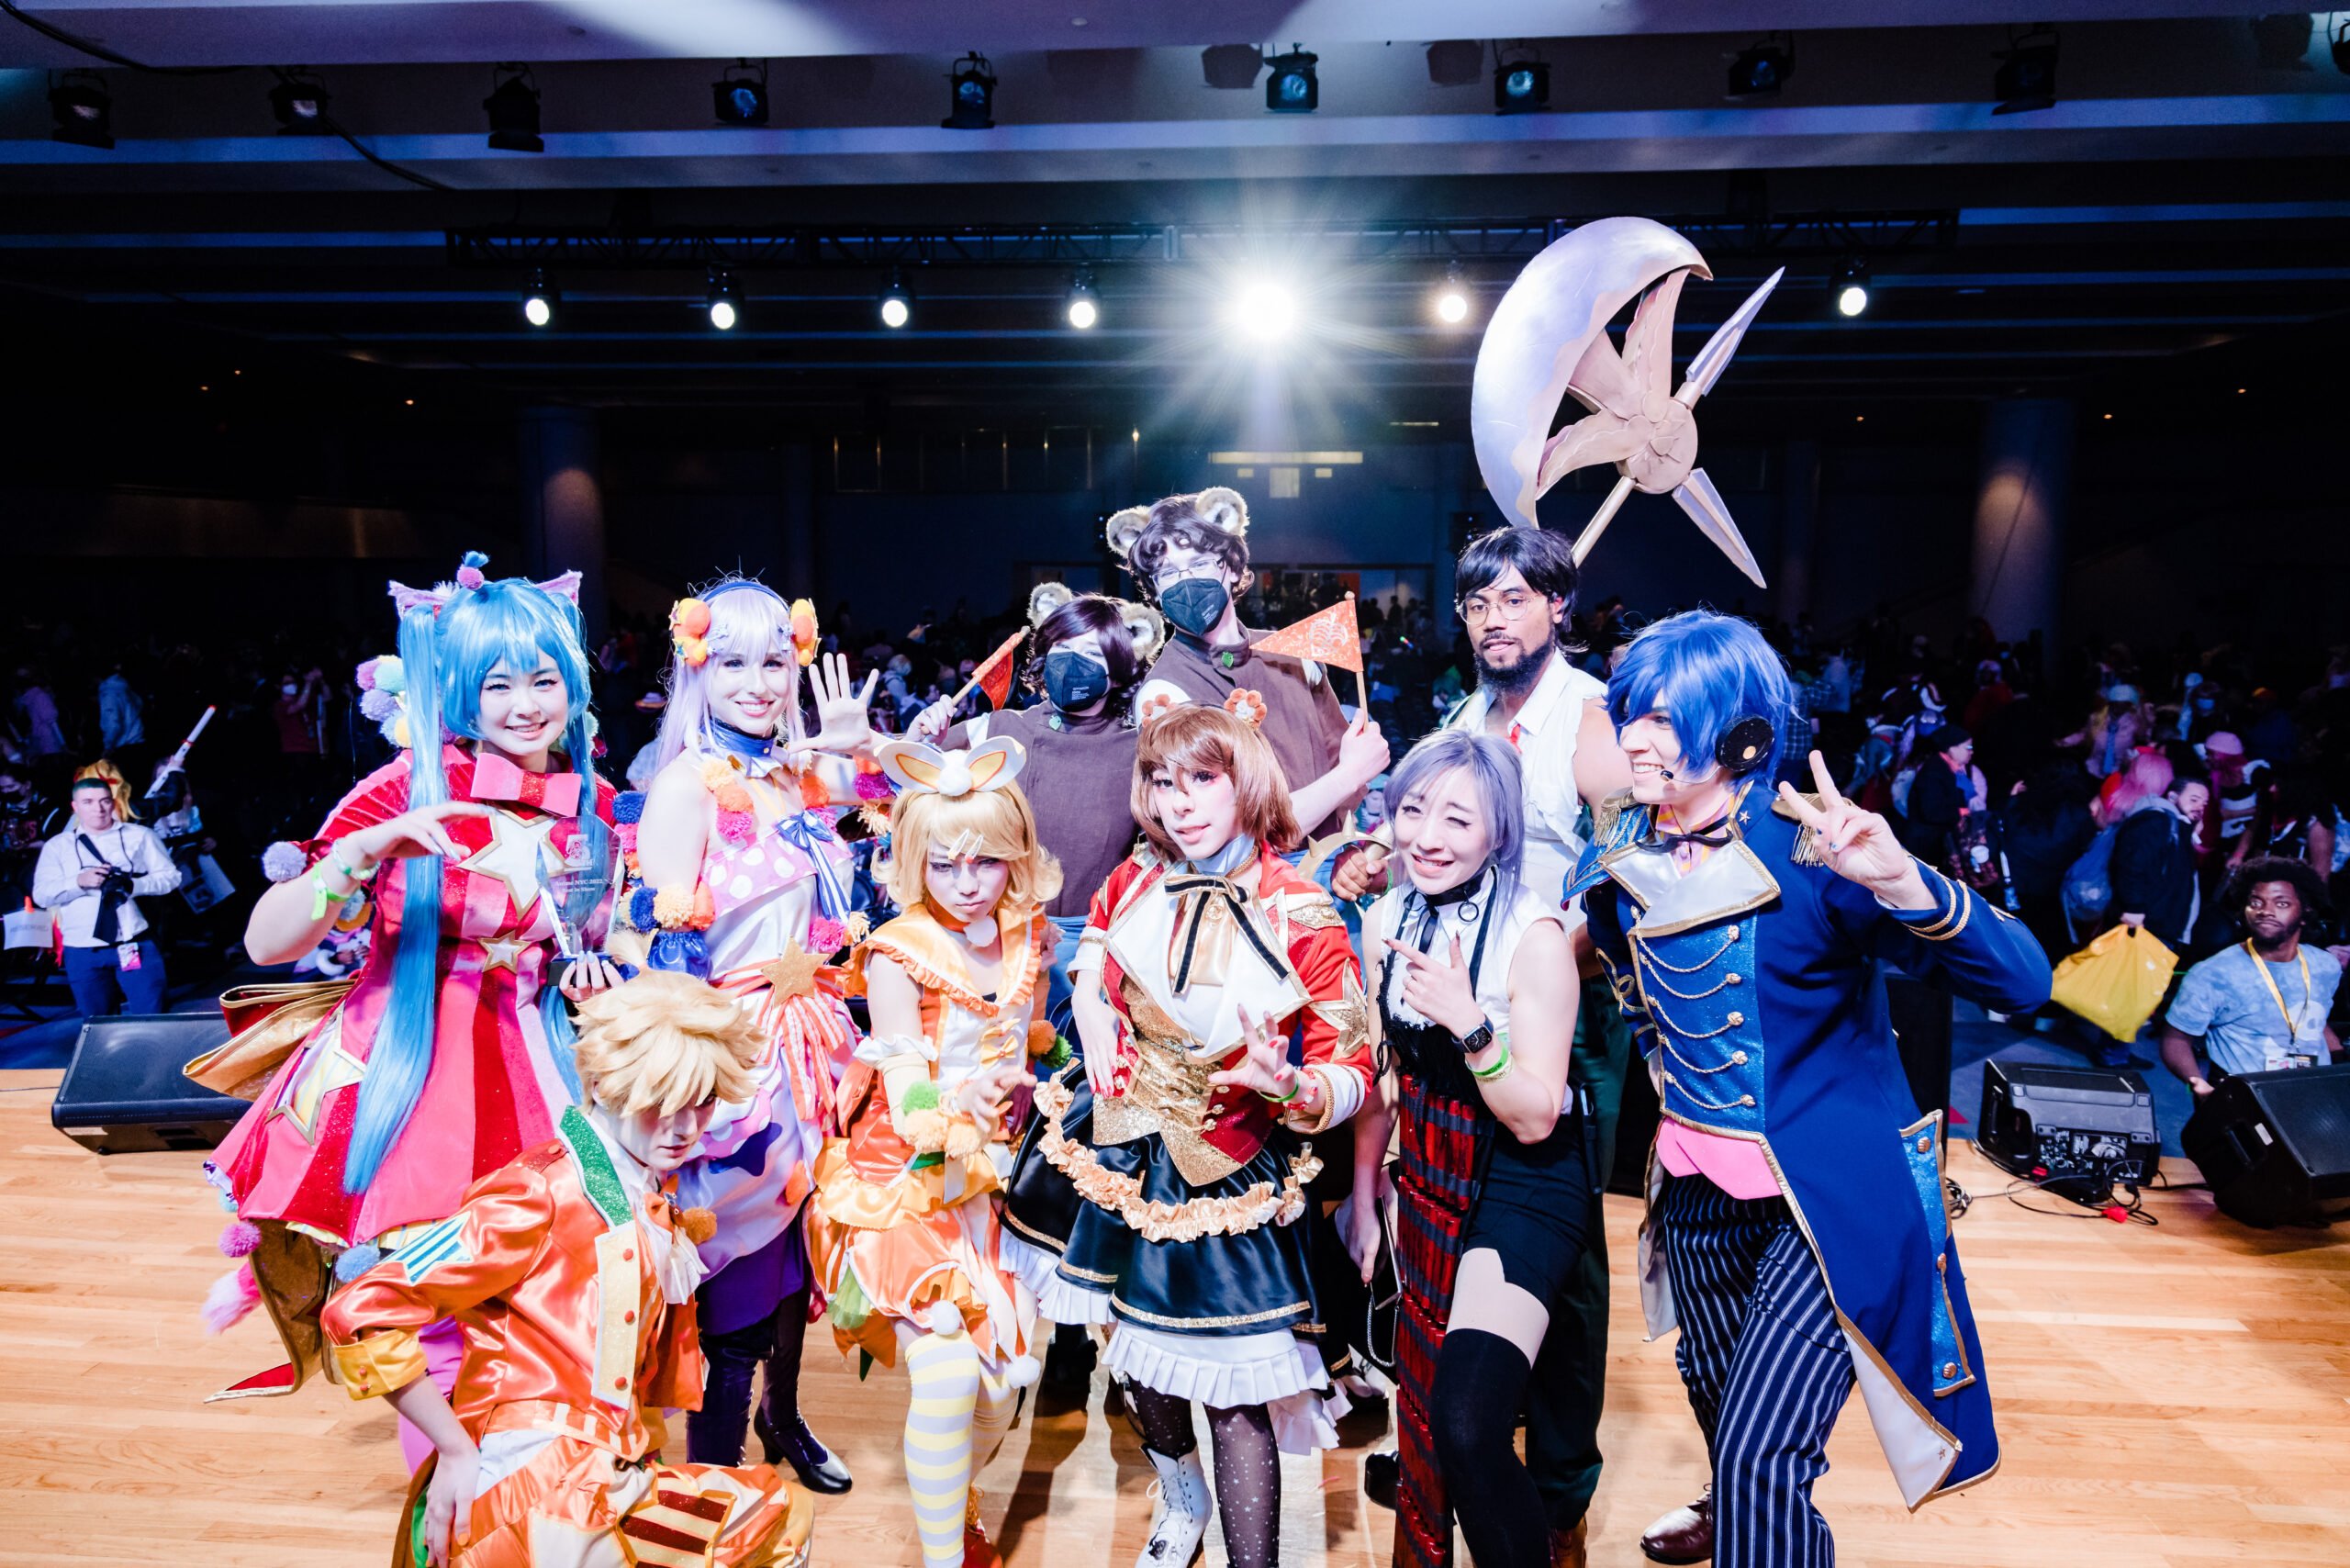 Anime Fan Fest'23, Register For FREE, Cosplay, Live Band Performance, &  Many More